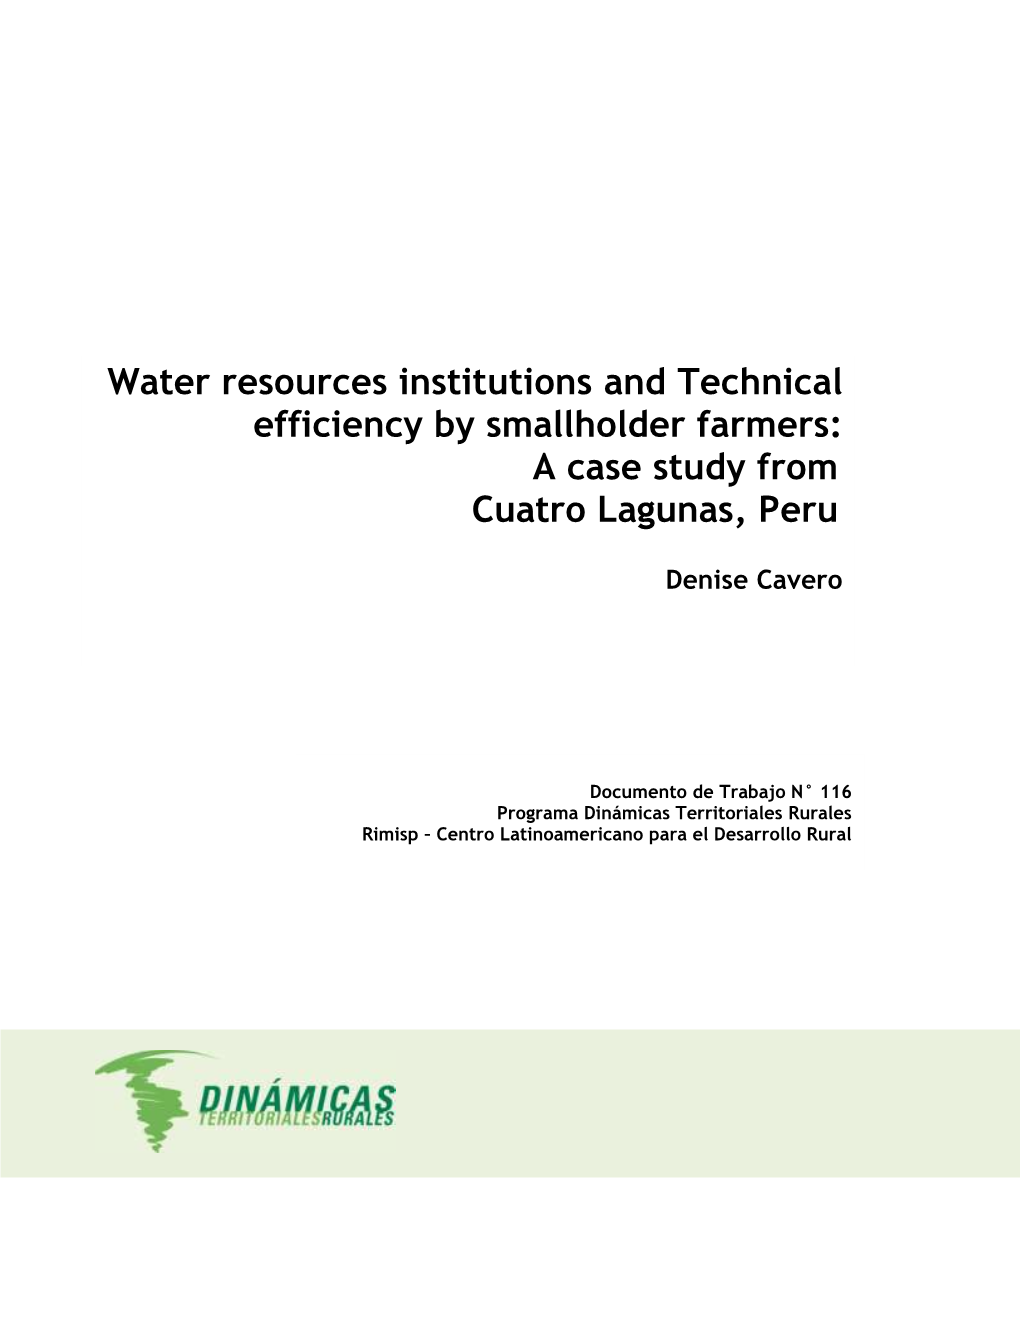 Water Resources Institutions and Technical Efficiency by Smallholder Farmers: a Case Study from Cuatro Lagunas, Peru”